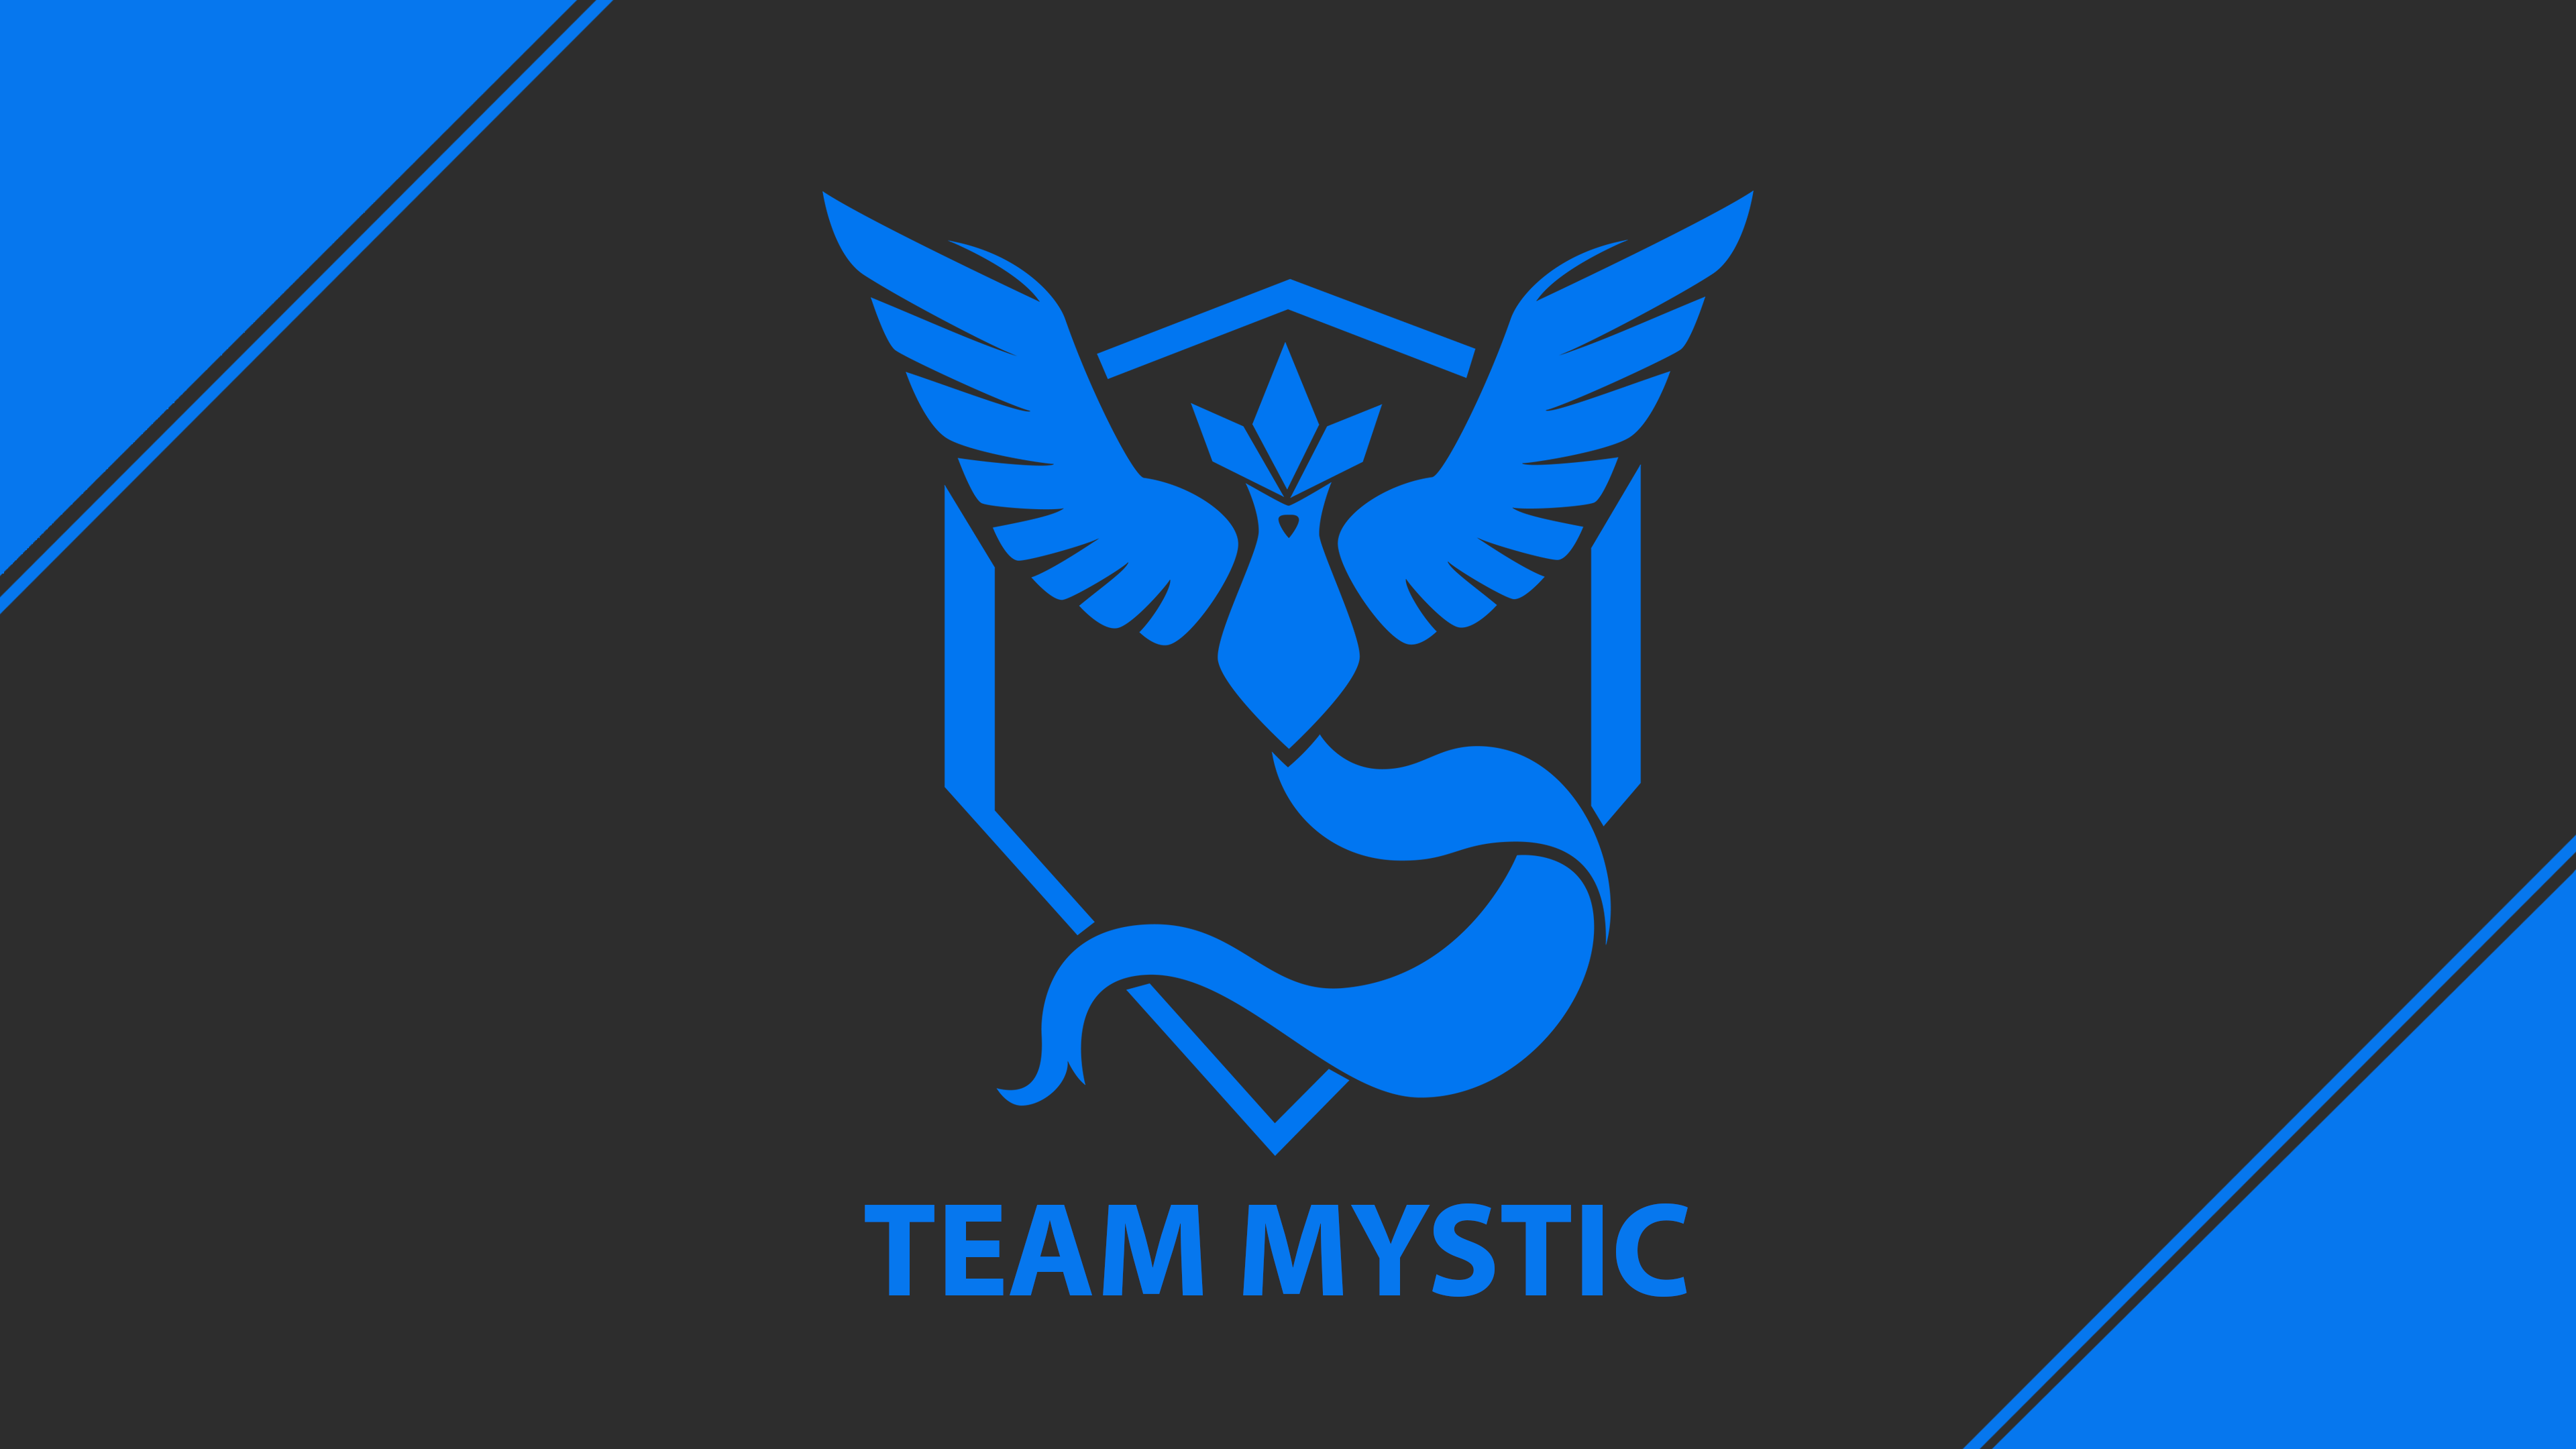 Team Mystic - Real Logo by Hebulicore